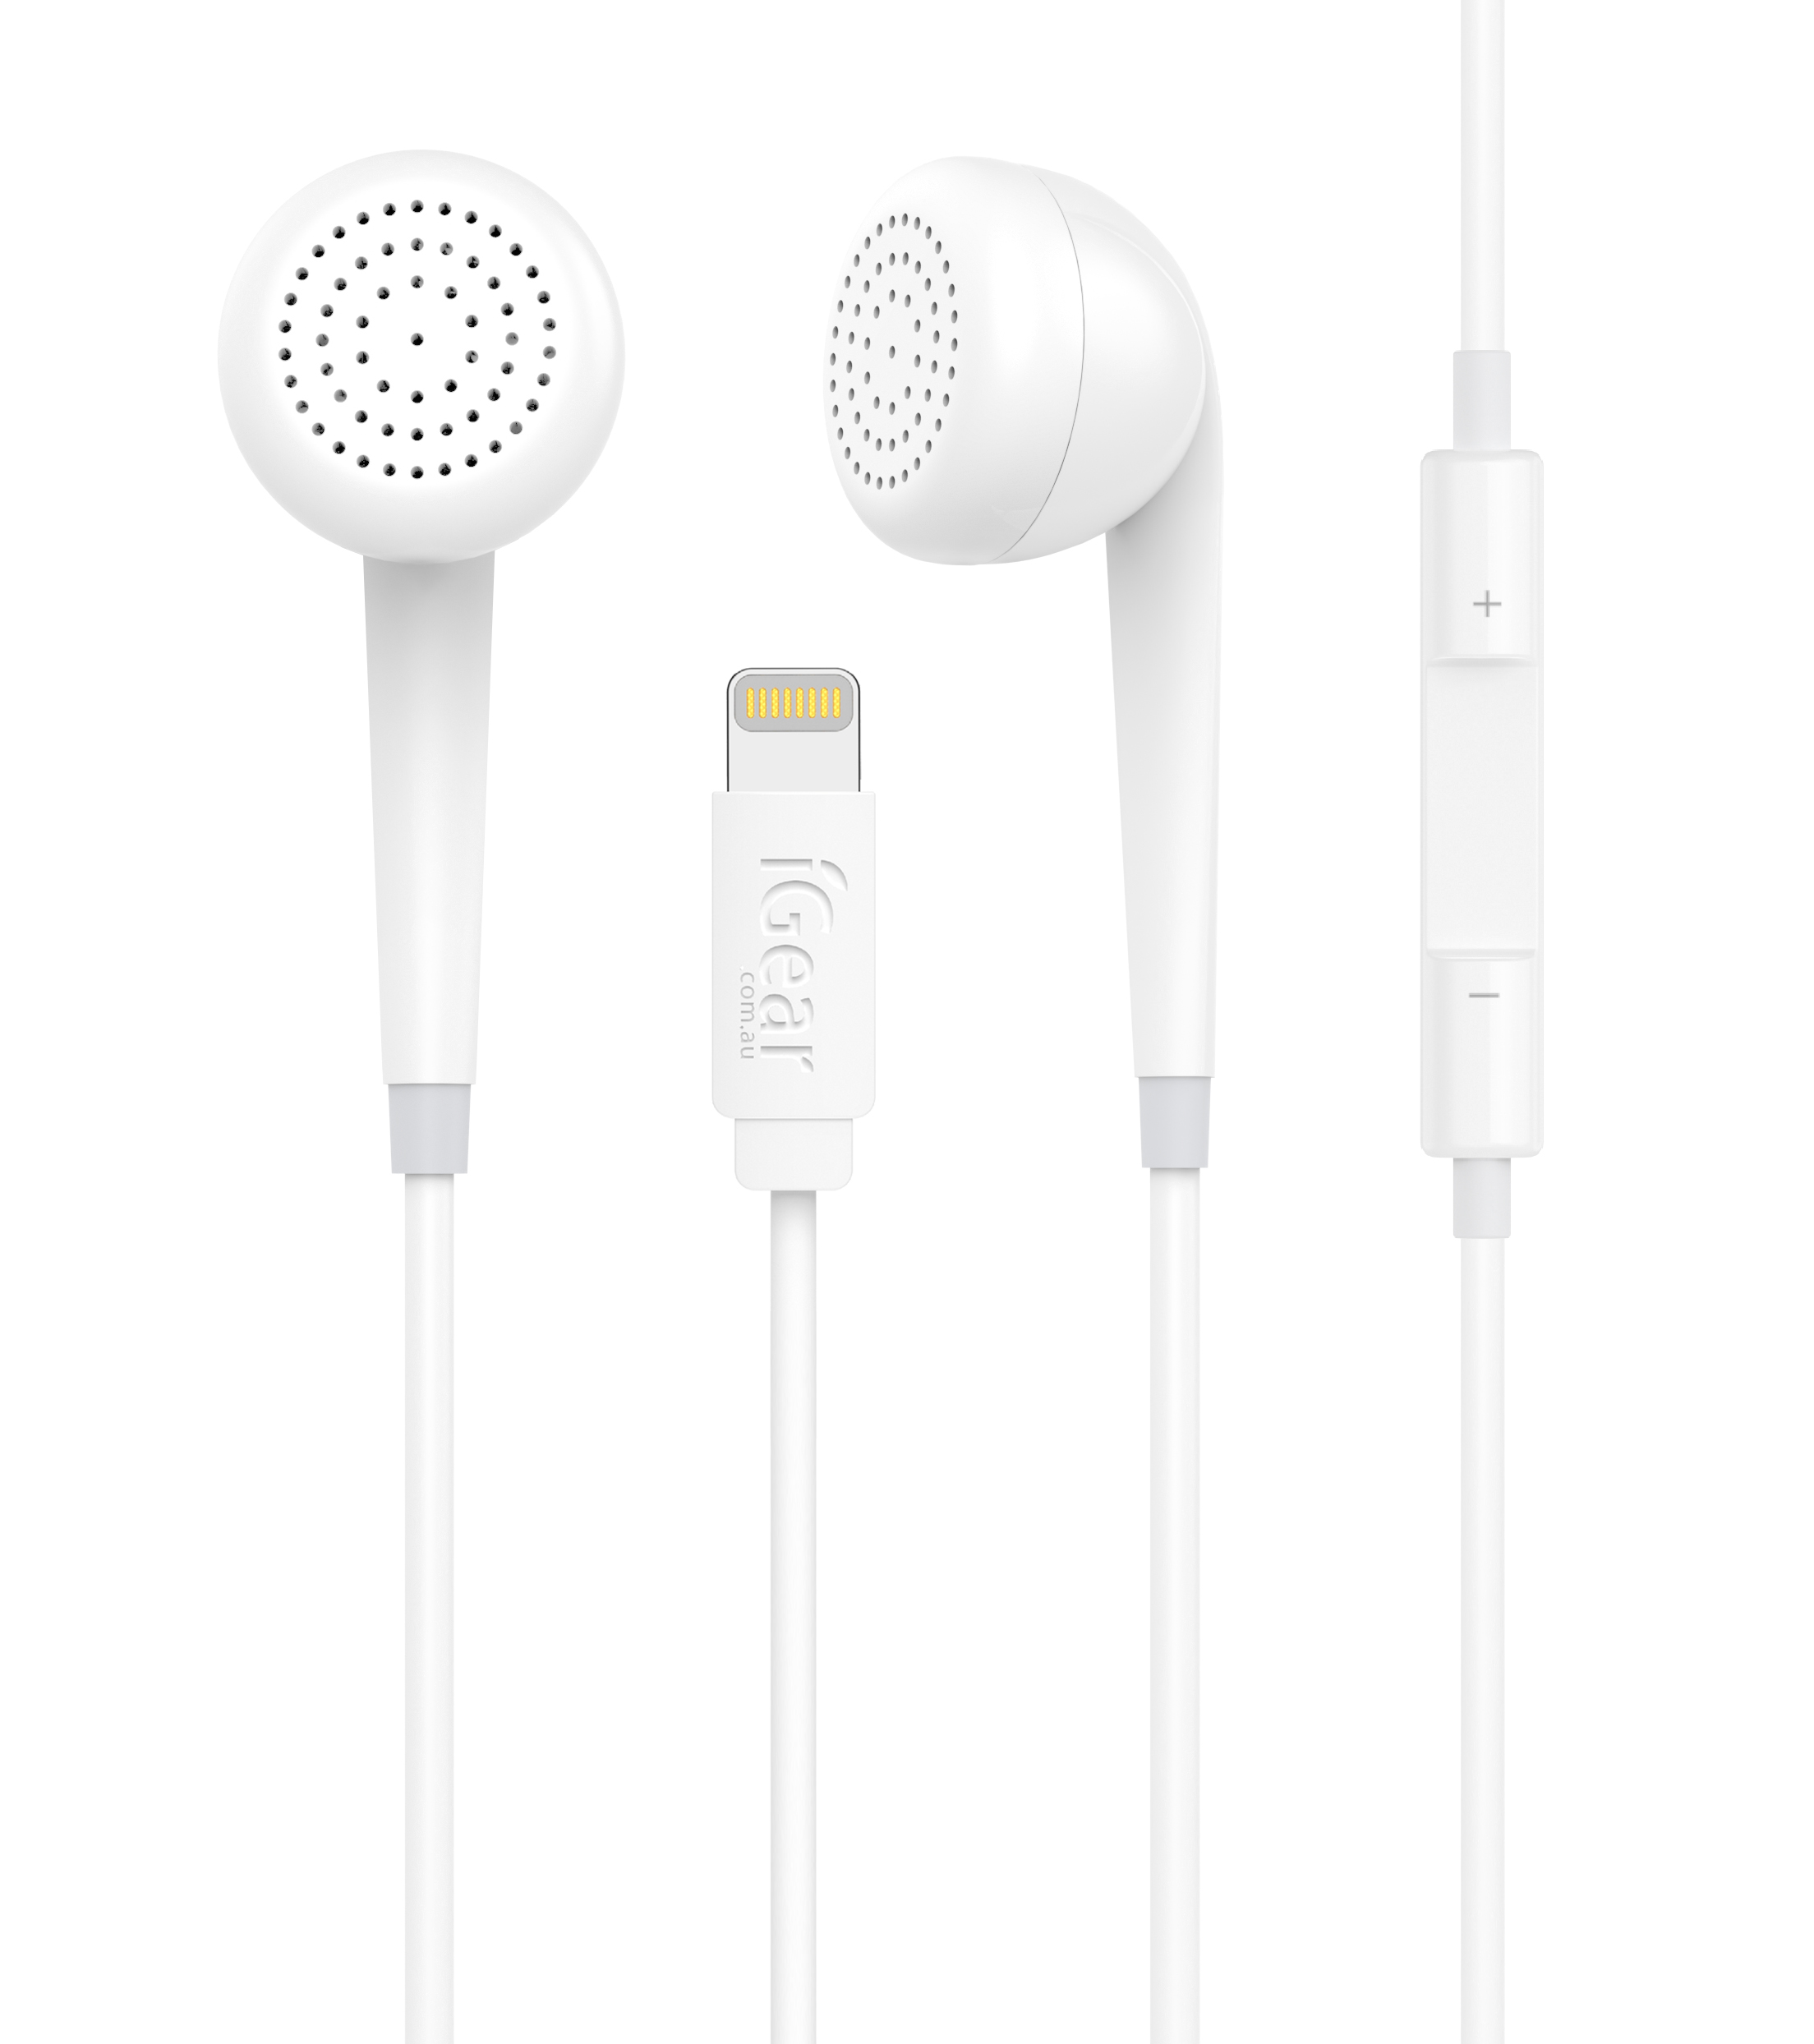 IG1920: Earphone Mic/Vol with 8 Pin Plug for iPhone 7/8/X - ig1920_1.png